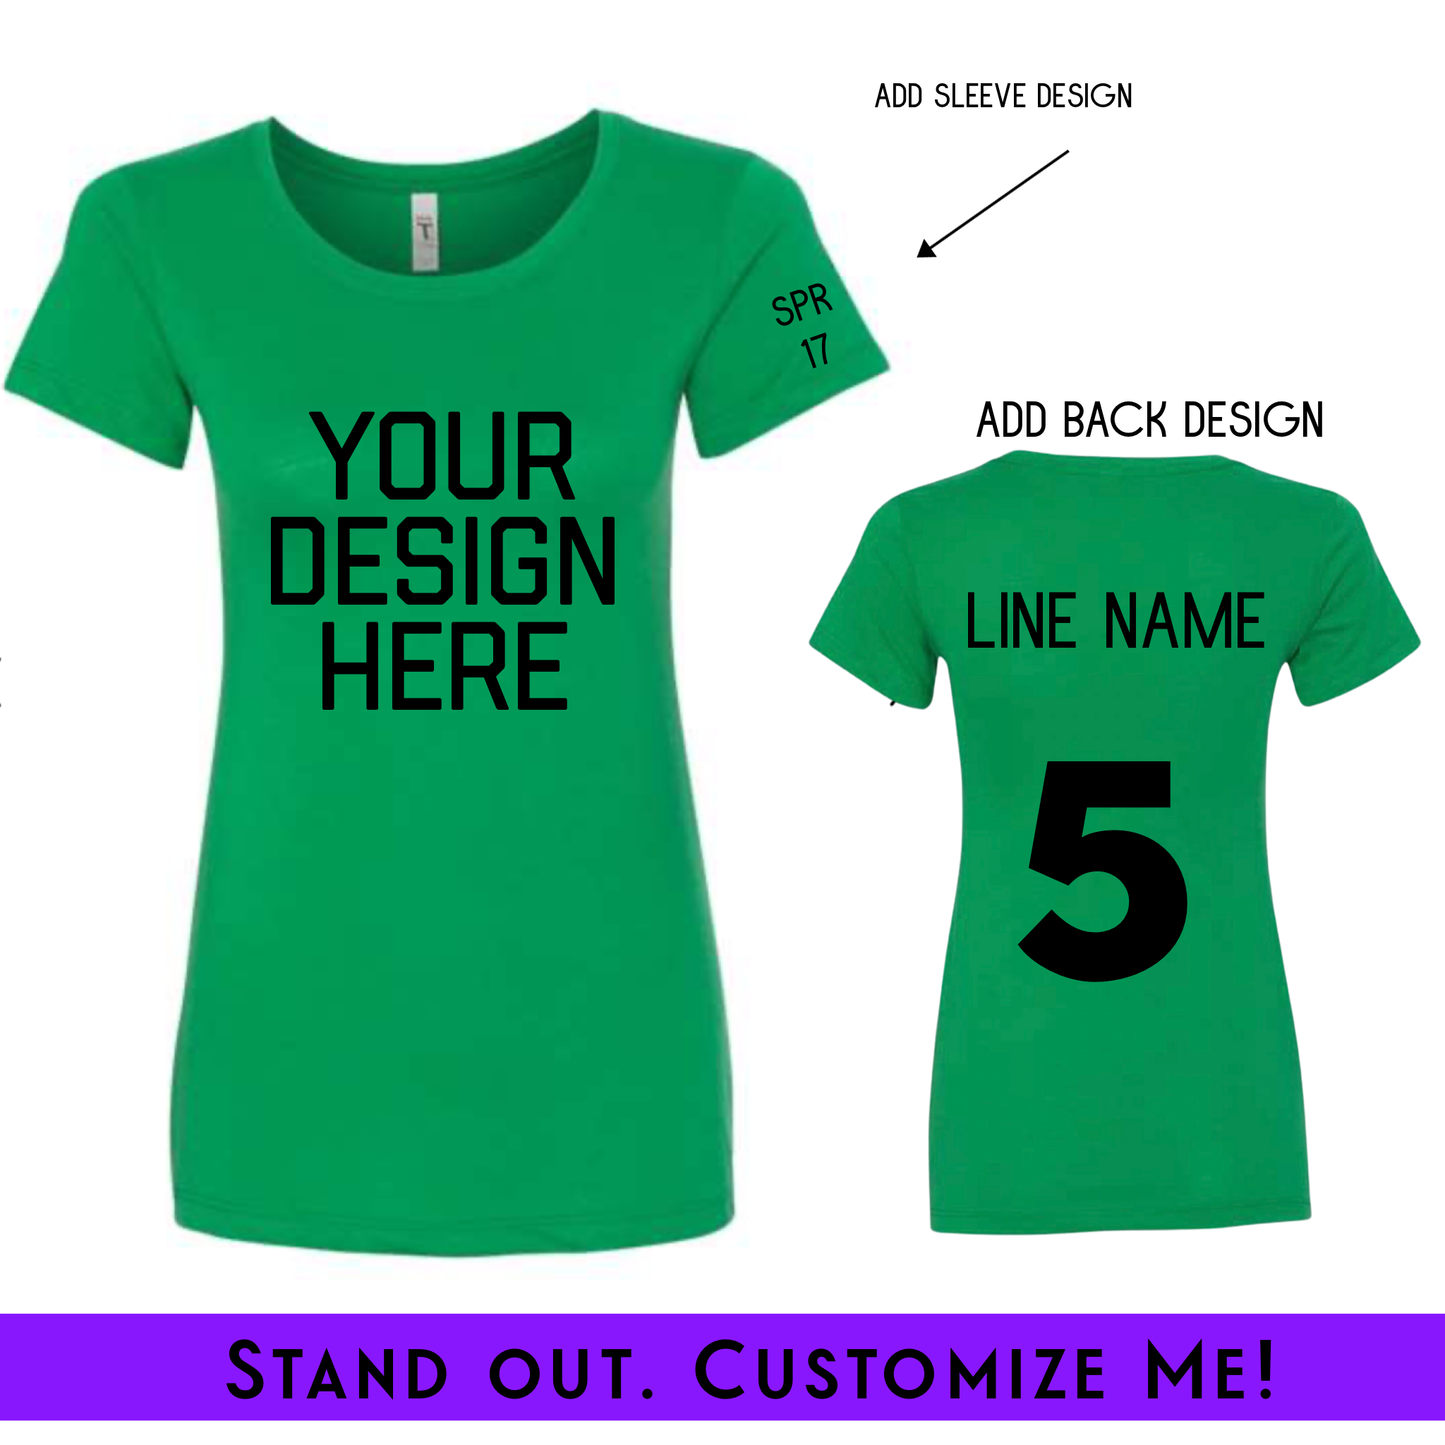 Design Your Own Ladies Fit Custom Screenprint Tee Green (FRONT + BACK + Sleeve) | Free Shipping